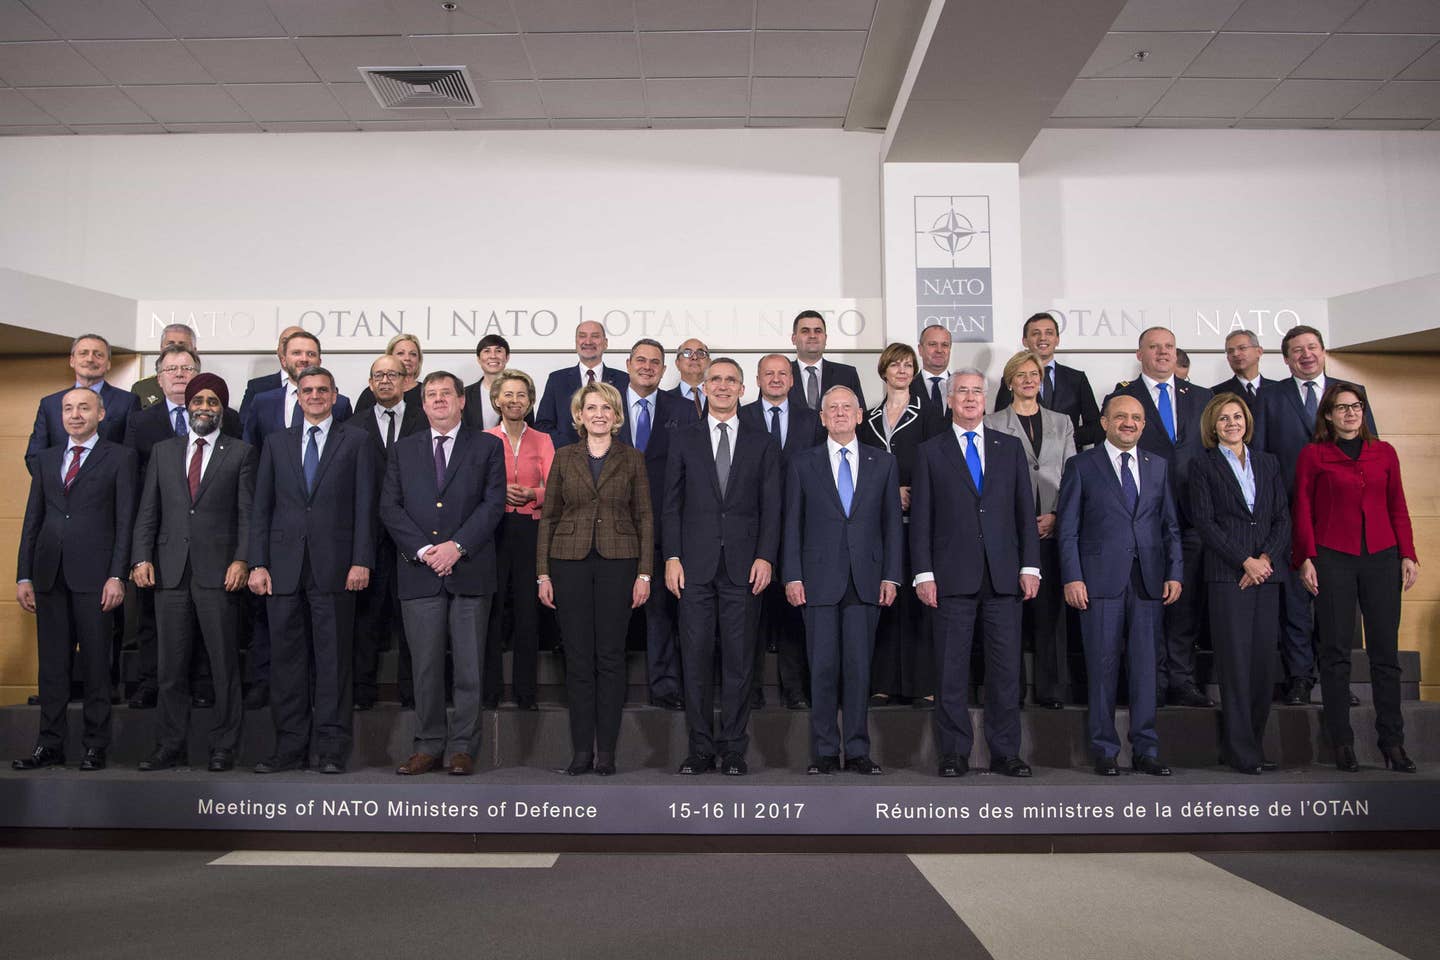 Defense Secretary Jim Mattis, front row, center right, and fellow defense ministers pose for a photo at NATO headquarters in Brussels, Feb. 15, 2017. (DoD photo by Air Force Tech. Sgt. Brigitte N. Brantley)